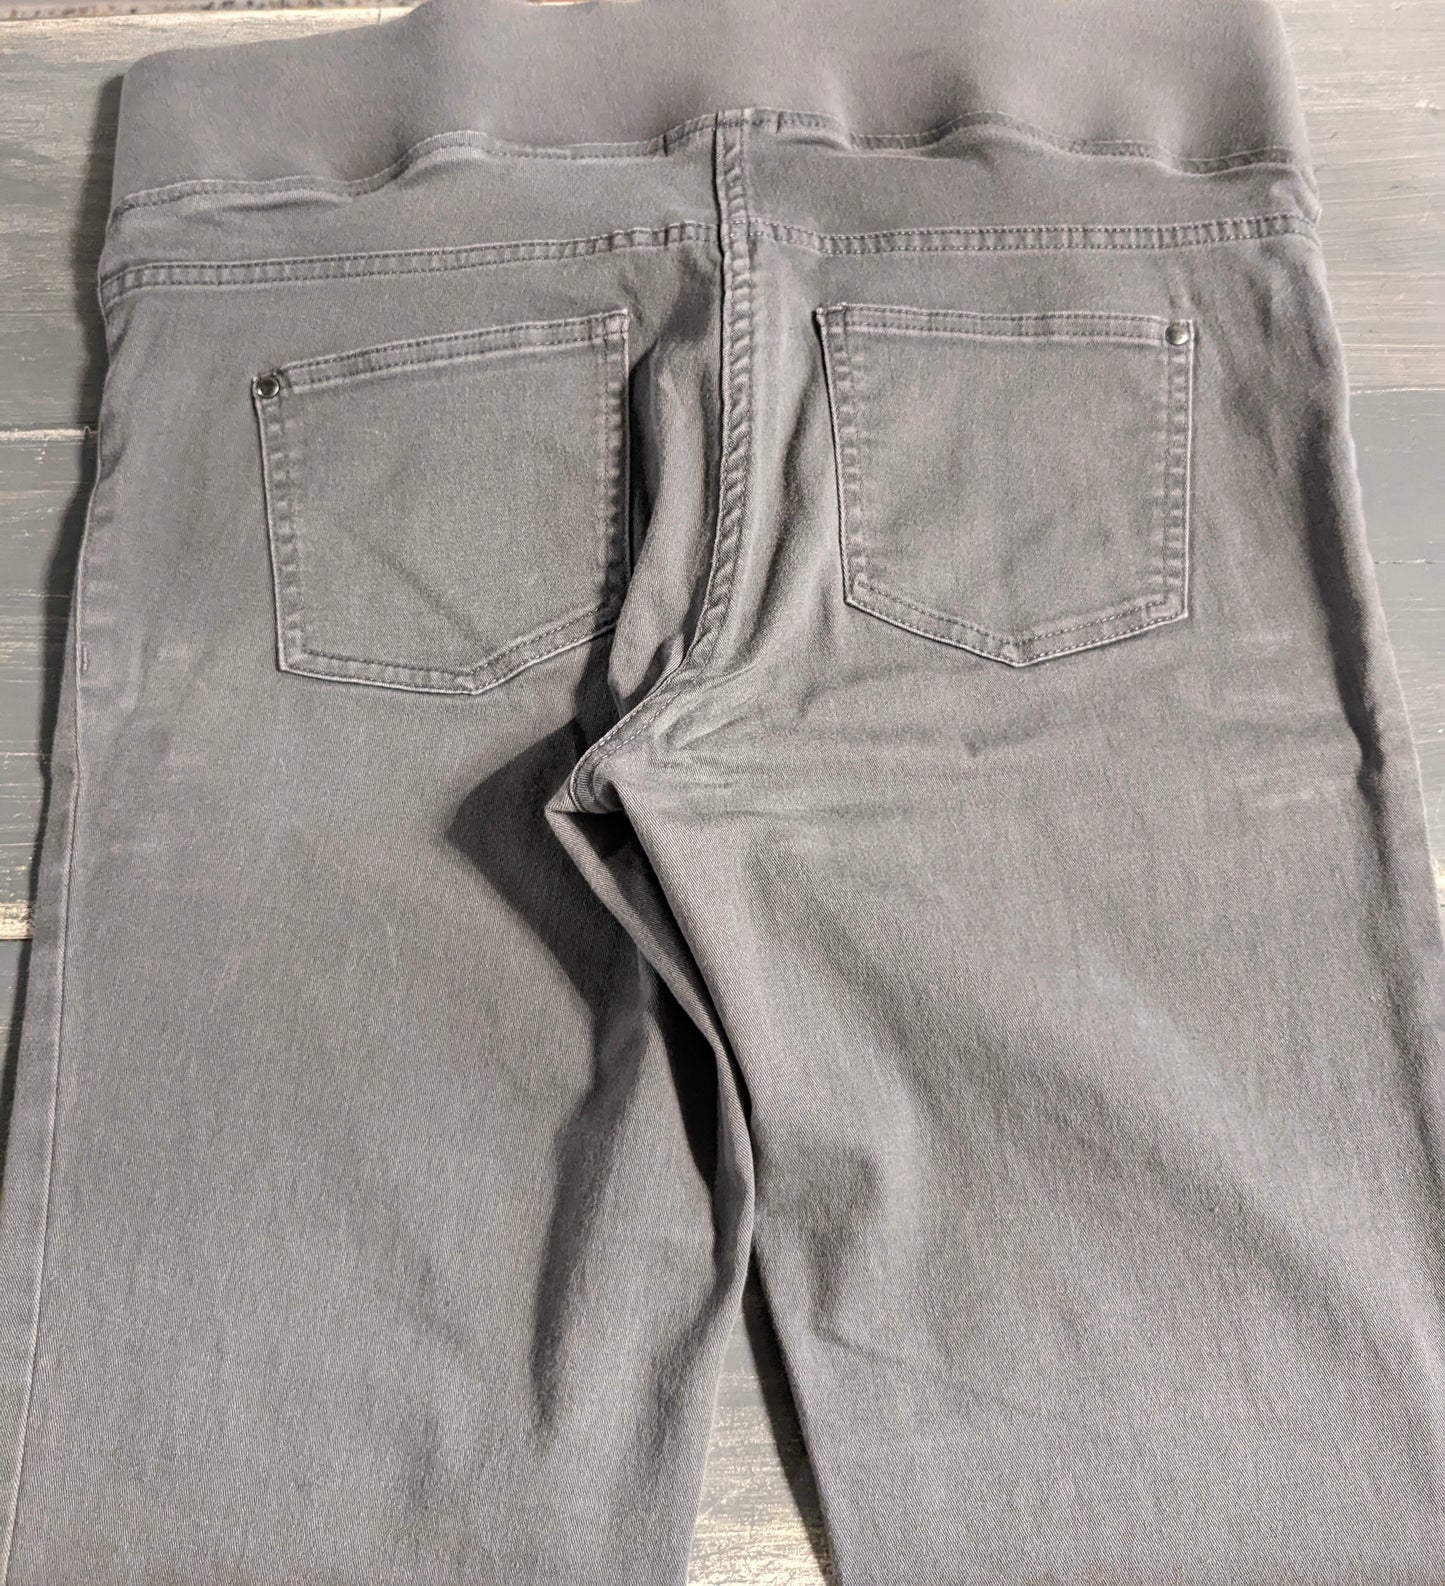 Under-belly panel 29" skinny jeans, Grey wash